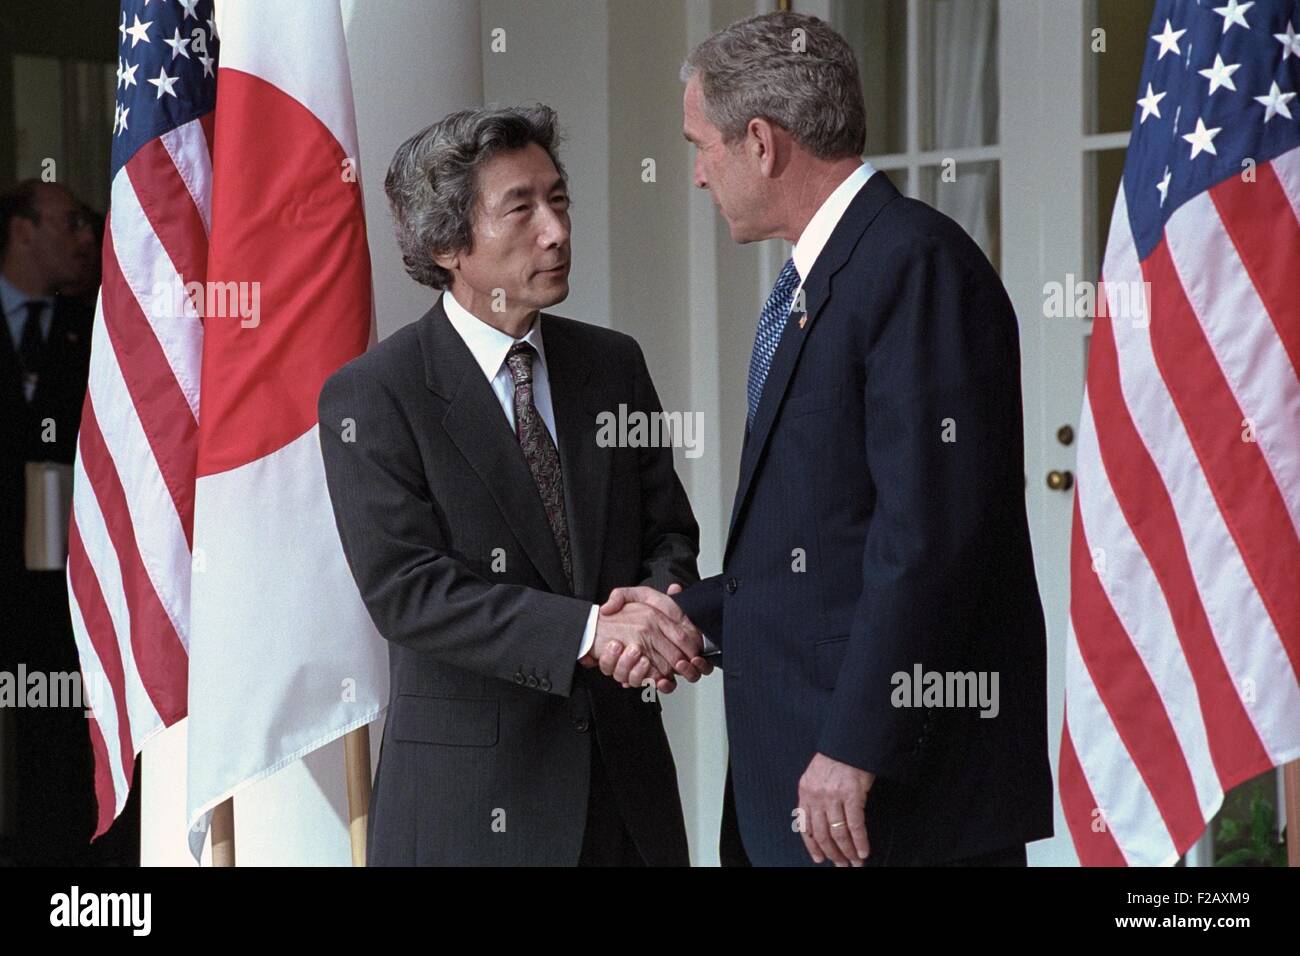 President George W. Bush shakes hands with Prime Minister Junichiro Koizumi of Japan. Sept. 25, 2001. Operation Enduring Freedom would start combat in Afghanistan on October 7, 2001. Japan would be a participant providing humanitarian aid. (BSLOC 2015 2 169) Stock Photo